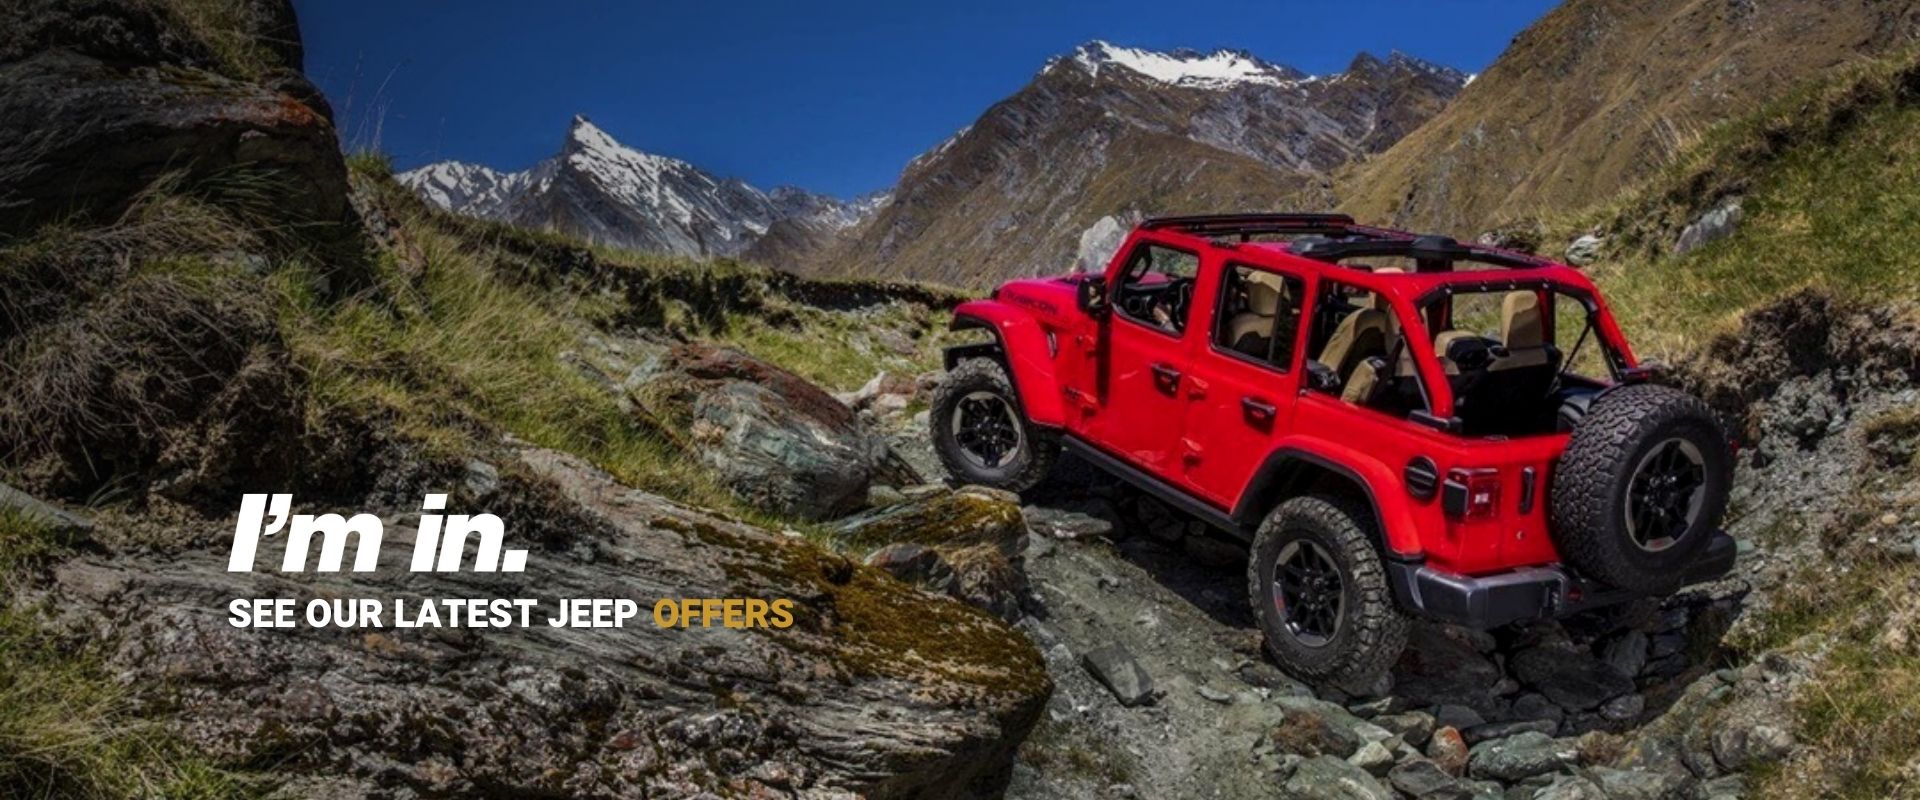 See our latest Jeep Offers